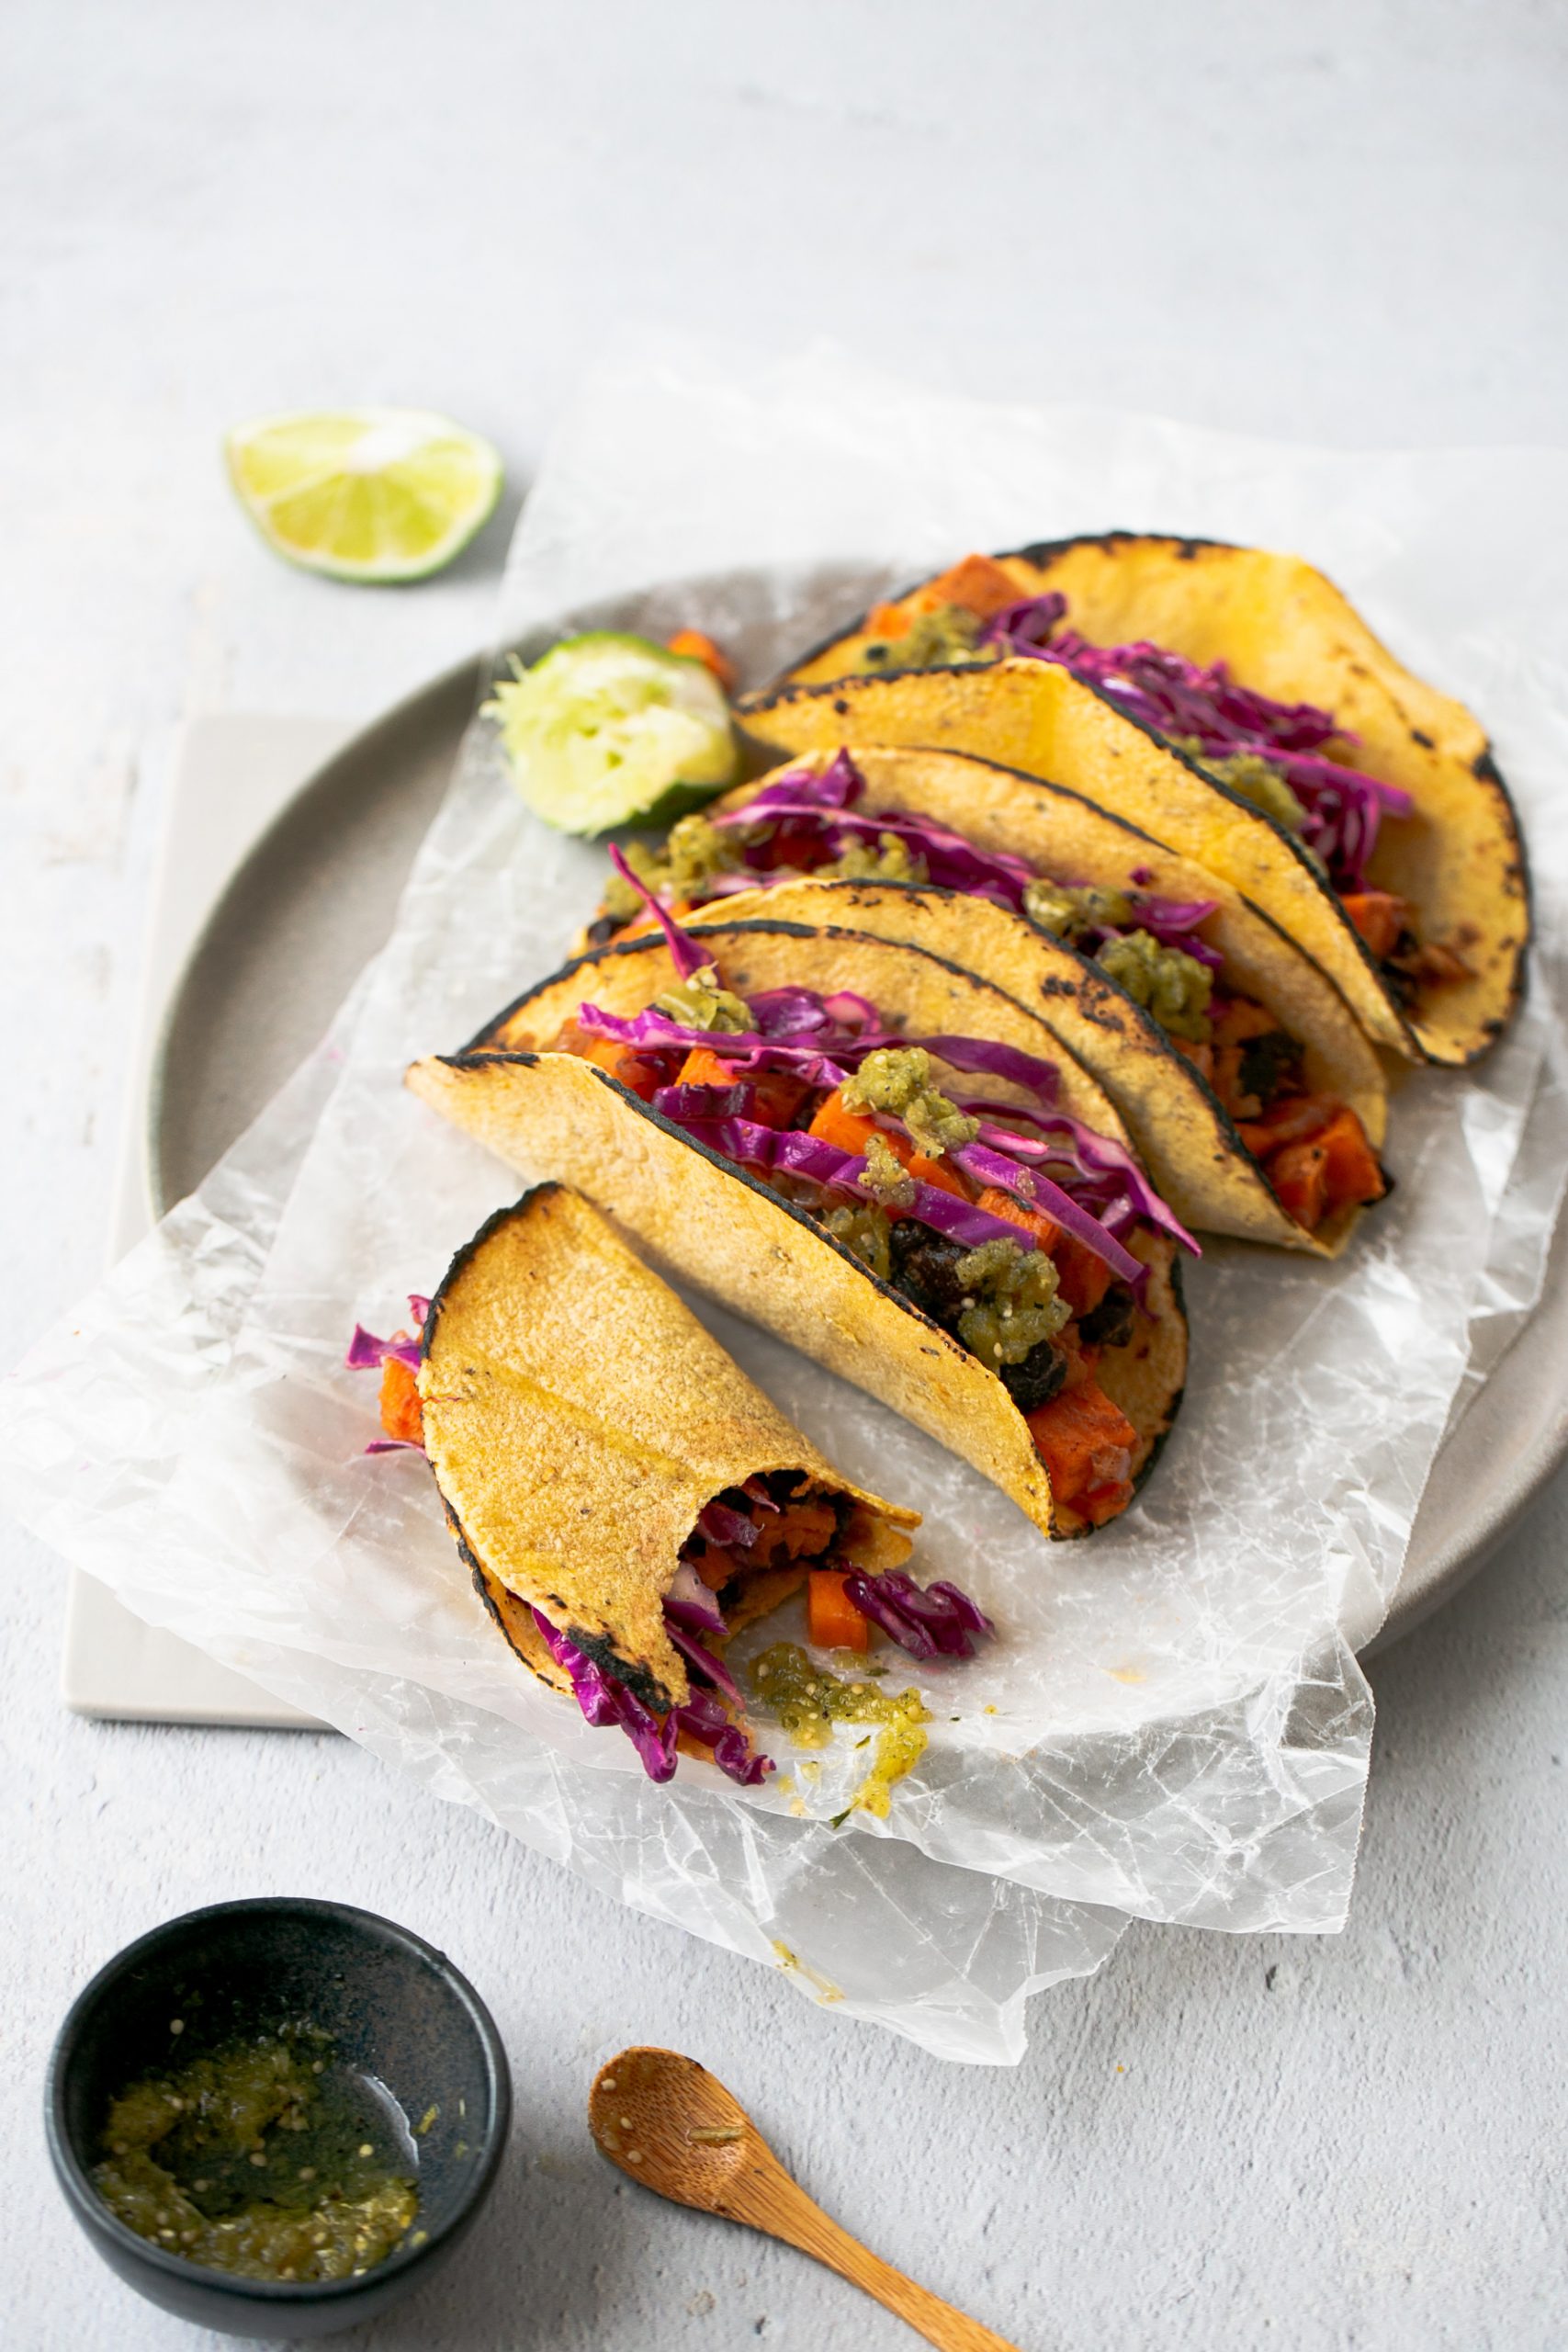 4 corn tortilla tacos with sweet potatoes, black beans and purple cabbage